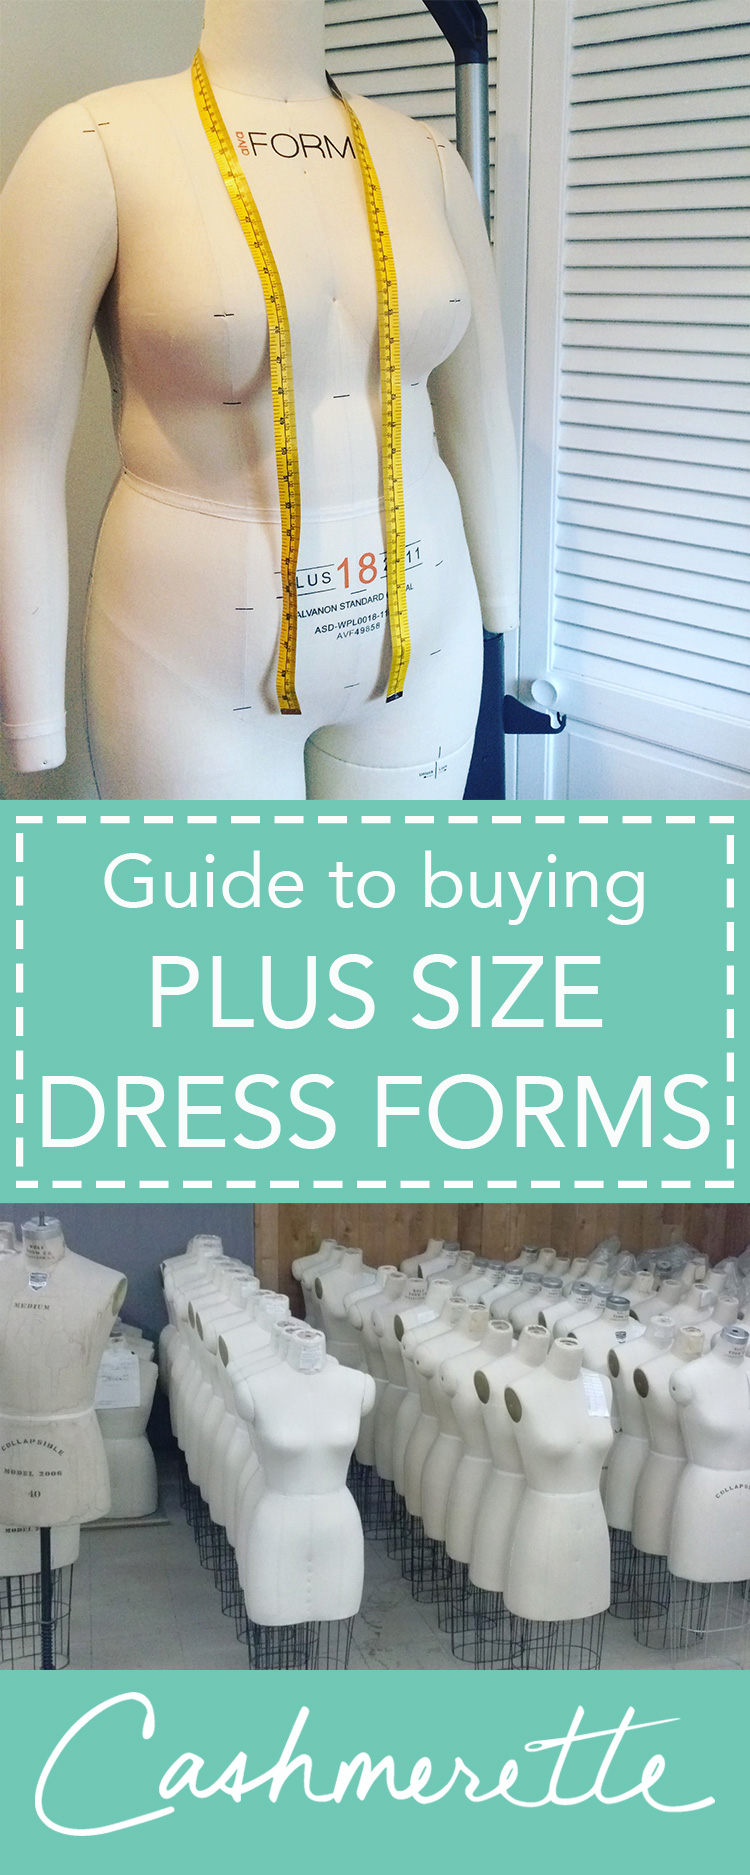 A guide to plus size dress forms for garment sewing by Cashmerette